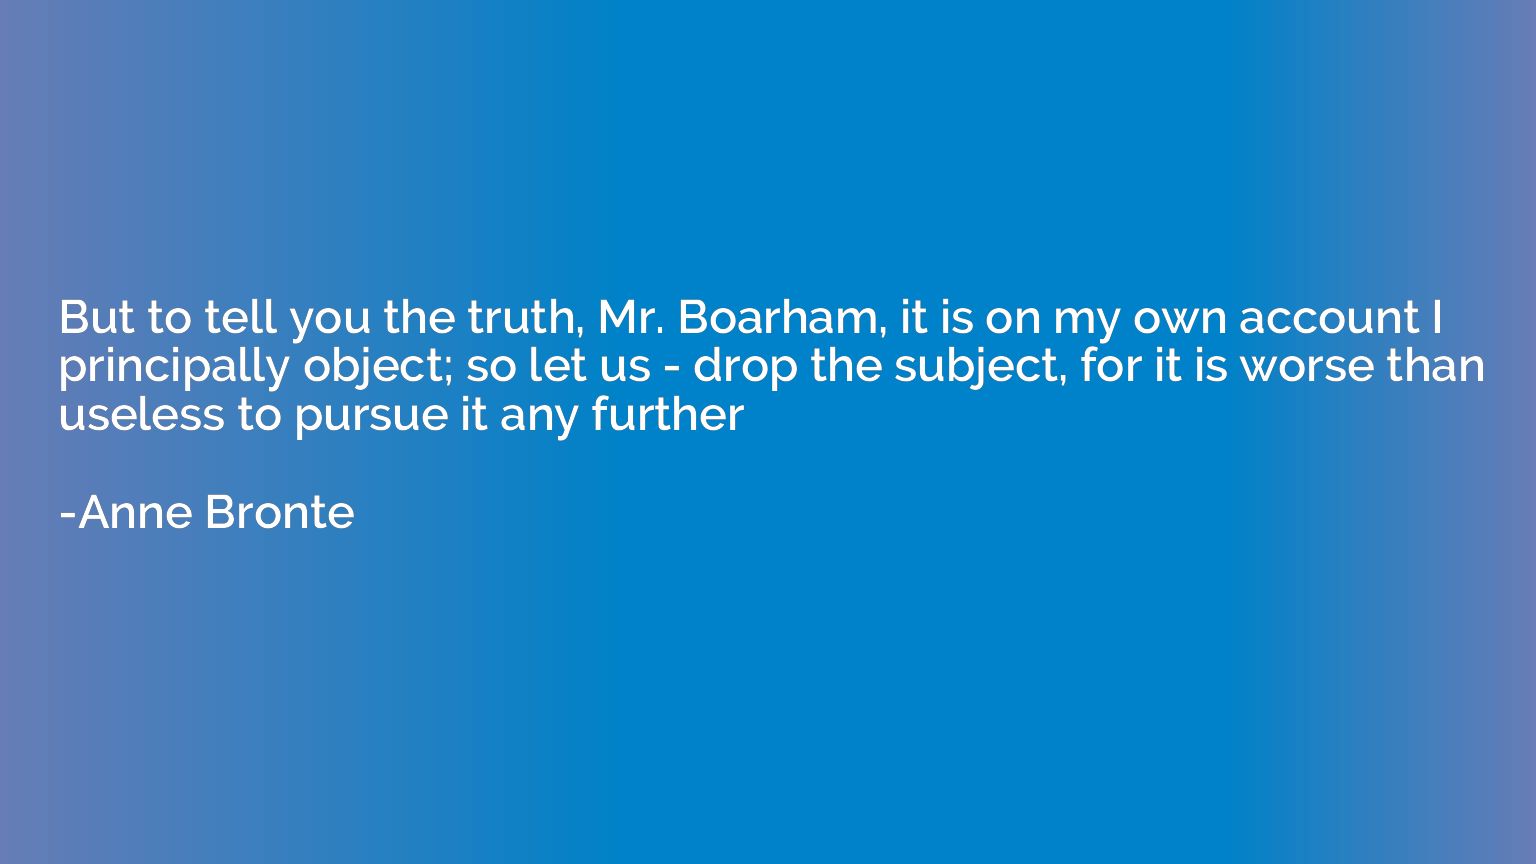 But to tell you the truth, Mr. Boarham, it is on my own acco